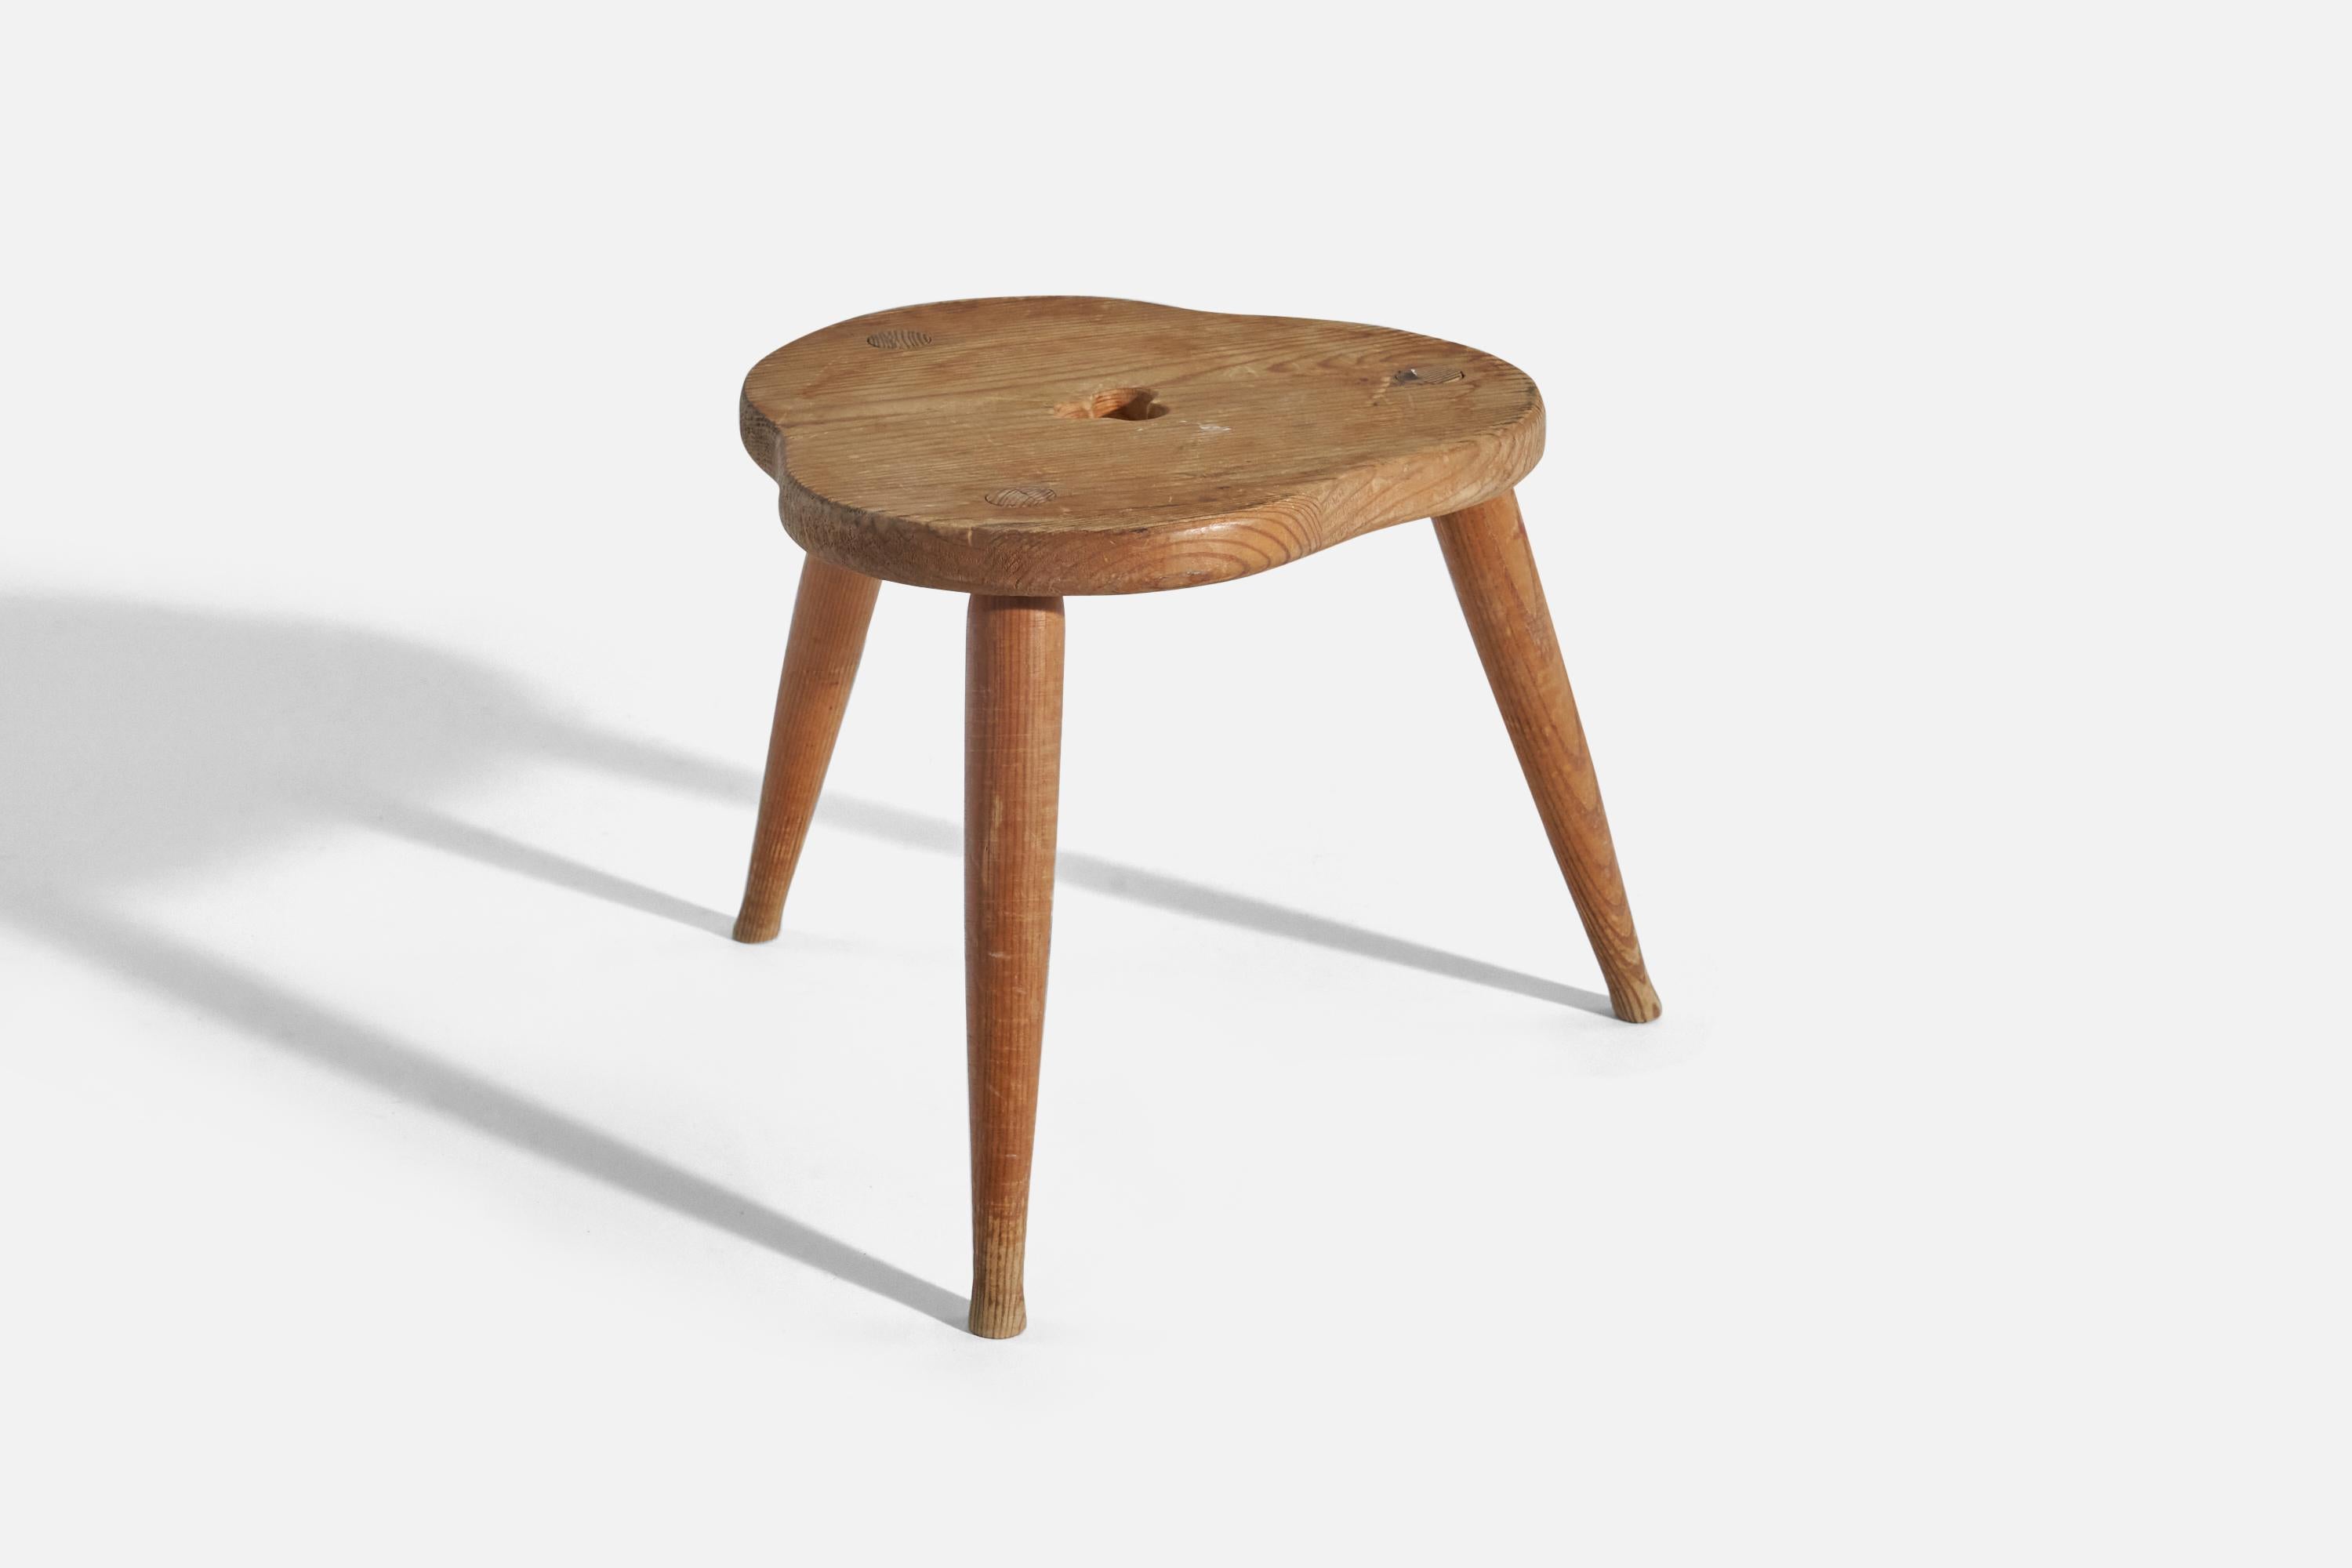 A solid pine stool designed and produced in Sweden, c. 1960s.